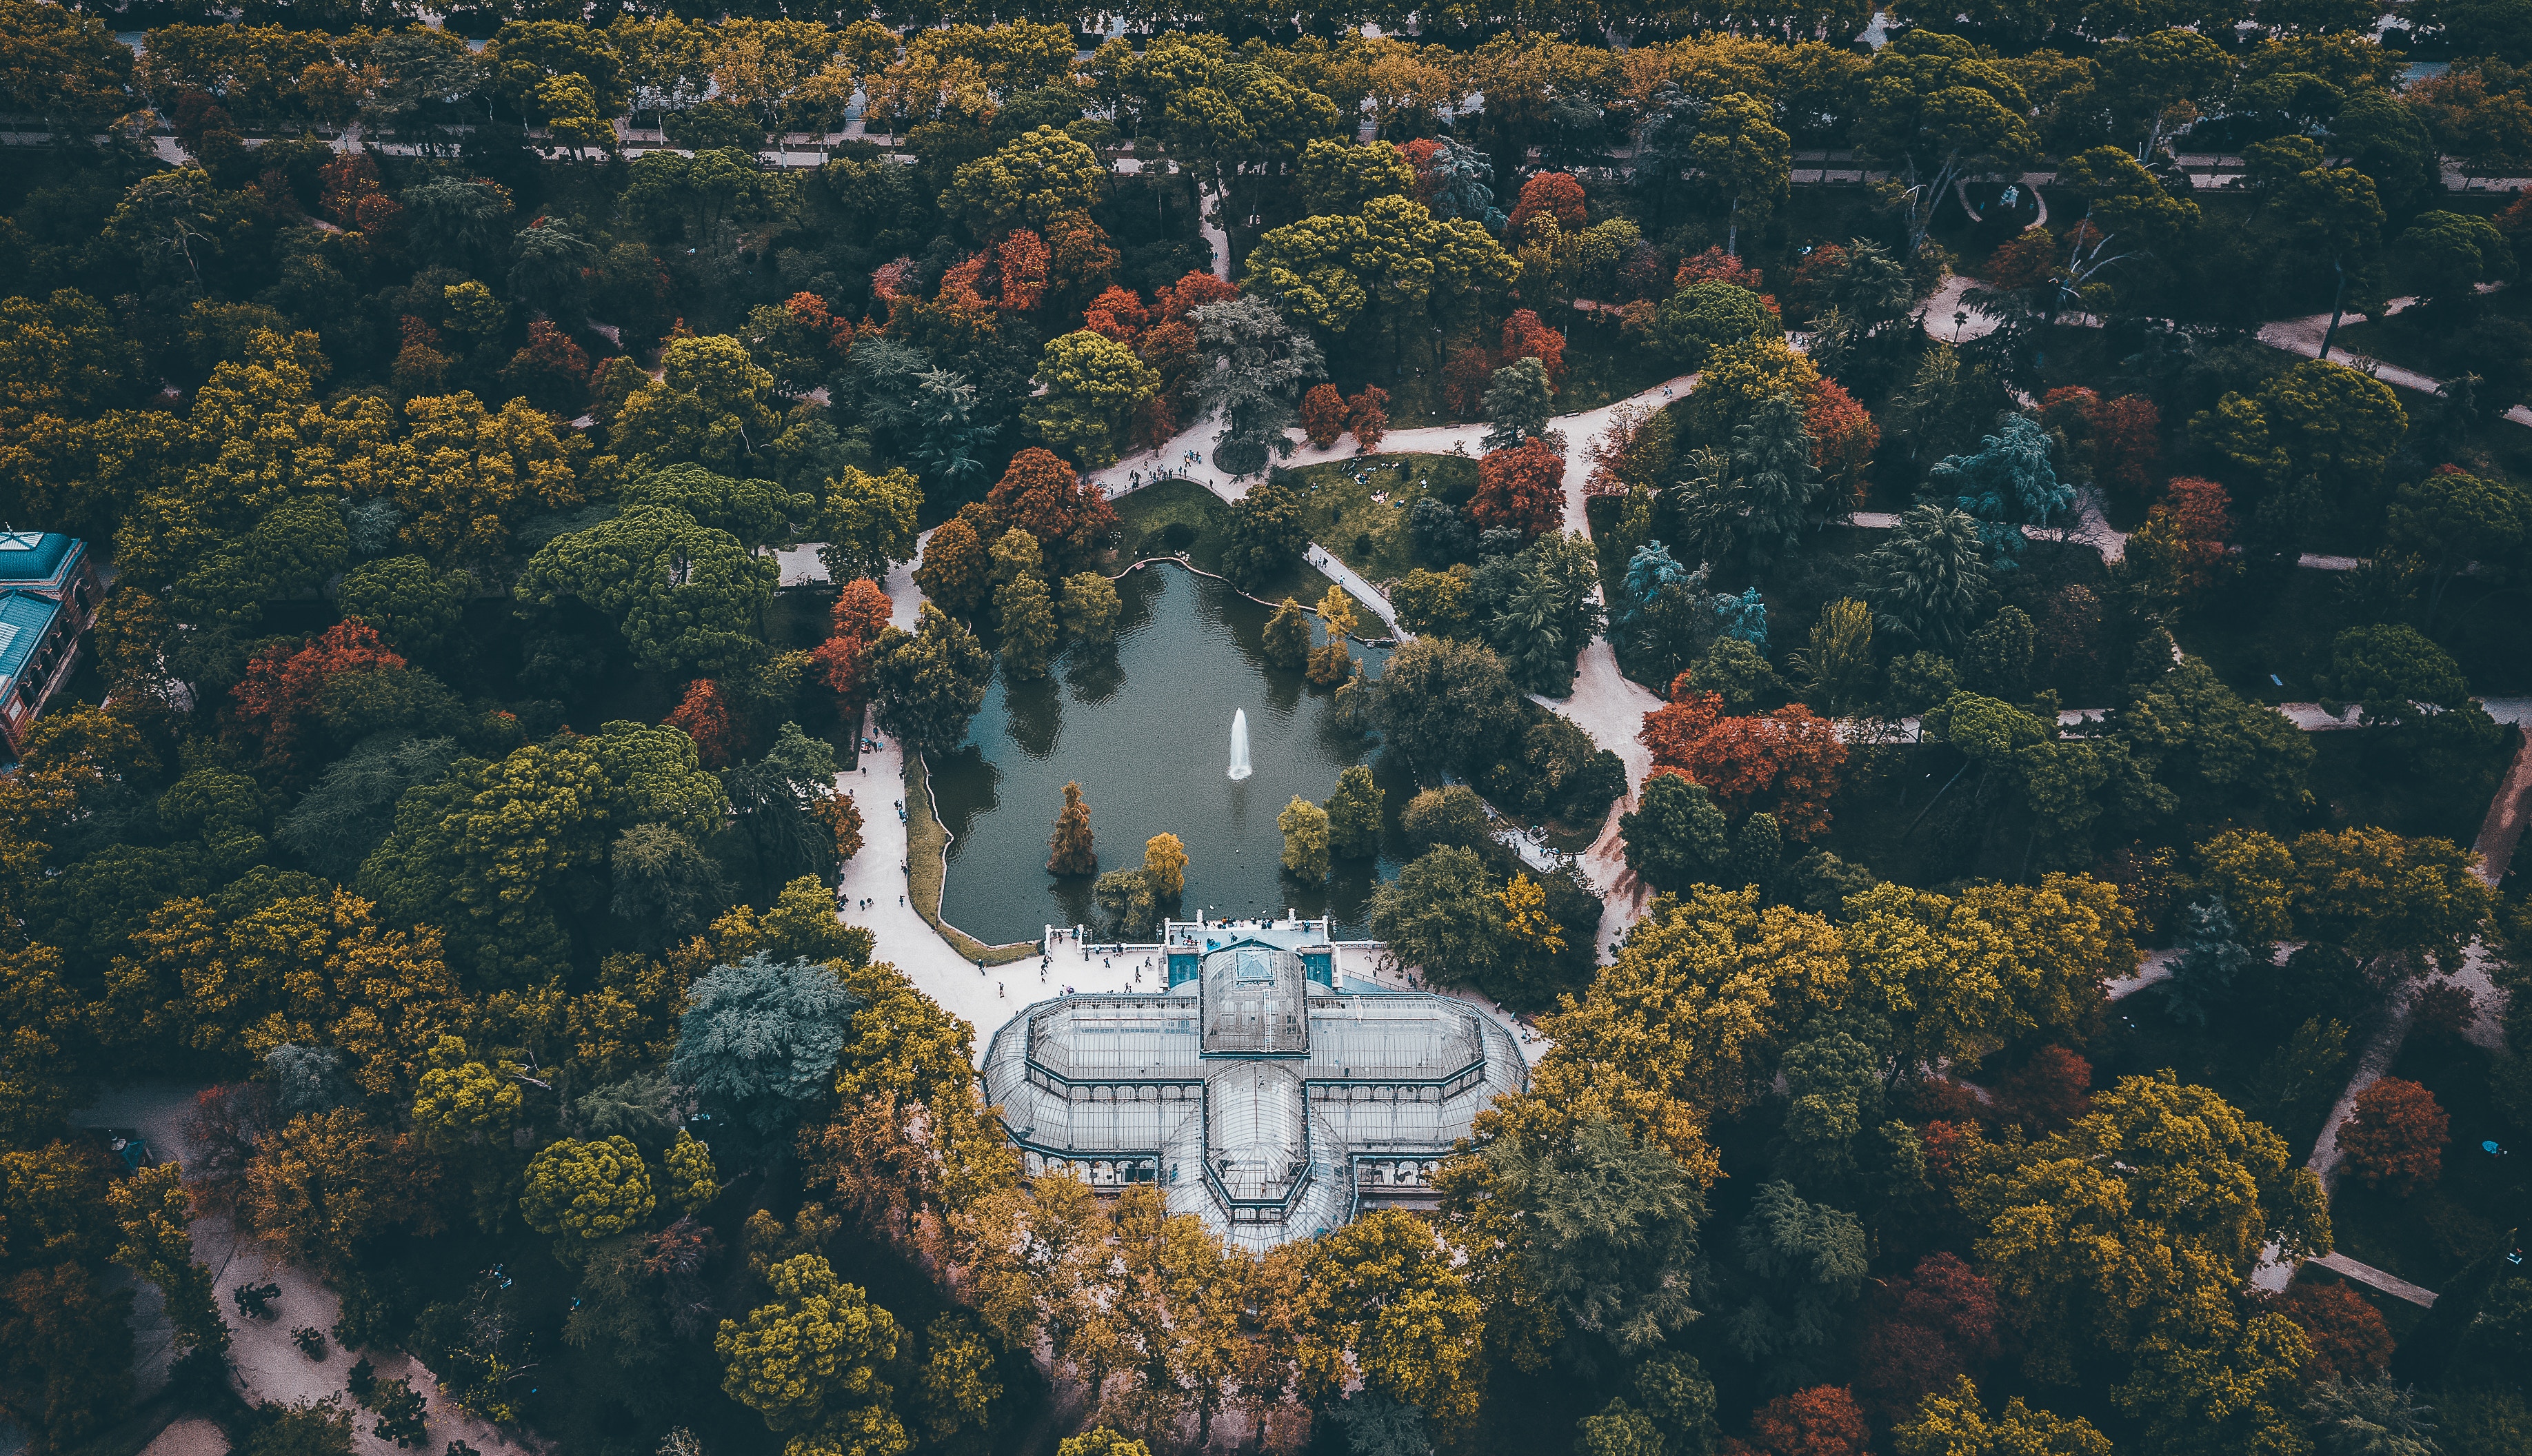 madrid, spain, landscape, cities, trees, architecture, view from above, palace Full HD